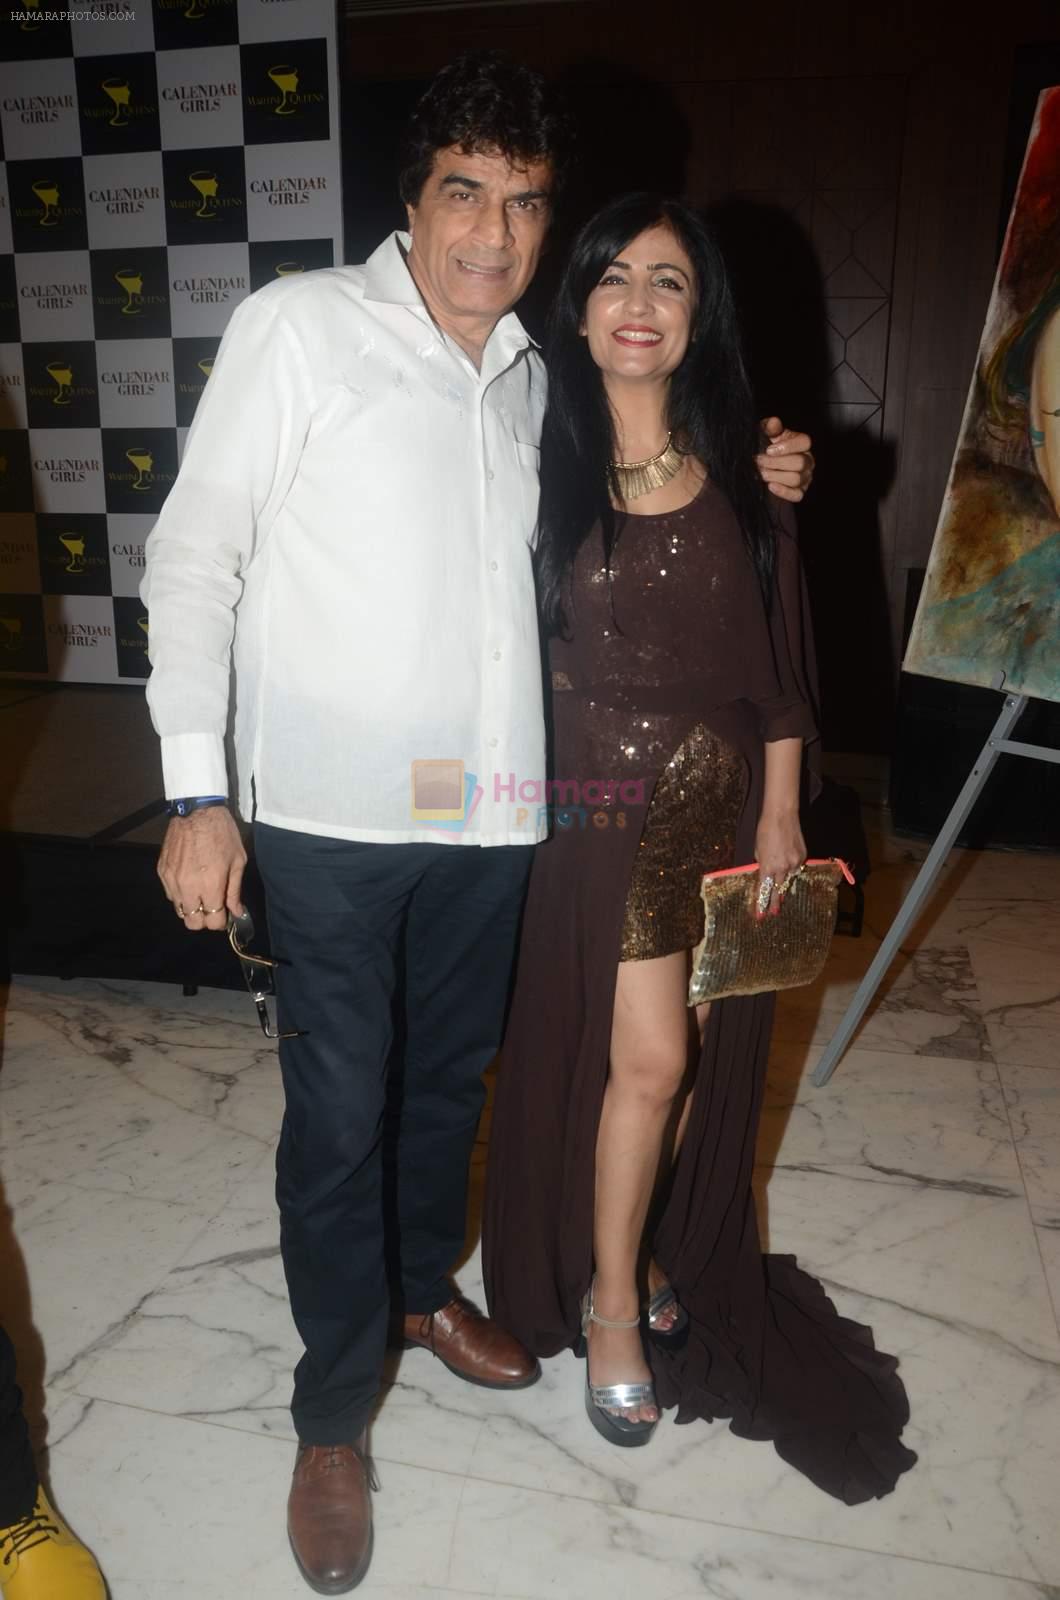 Shibani Kashyap at Tarun Sarda's Martin Queen's exhibition with Calendar Girls in Enigma on 31st Aug 2015